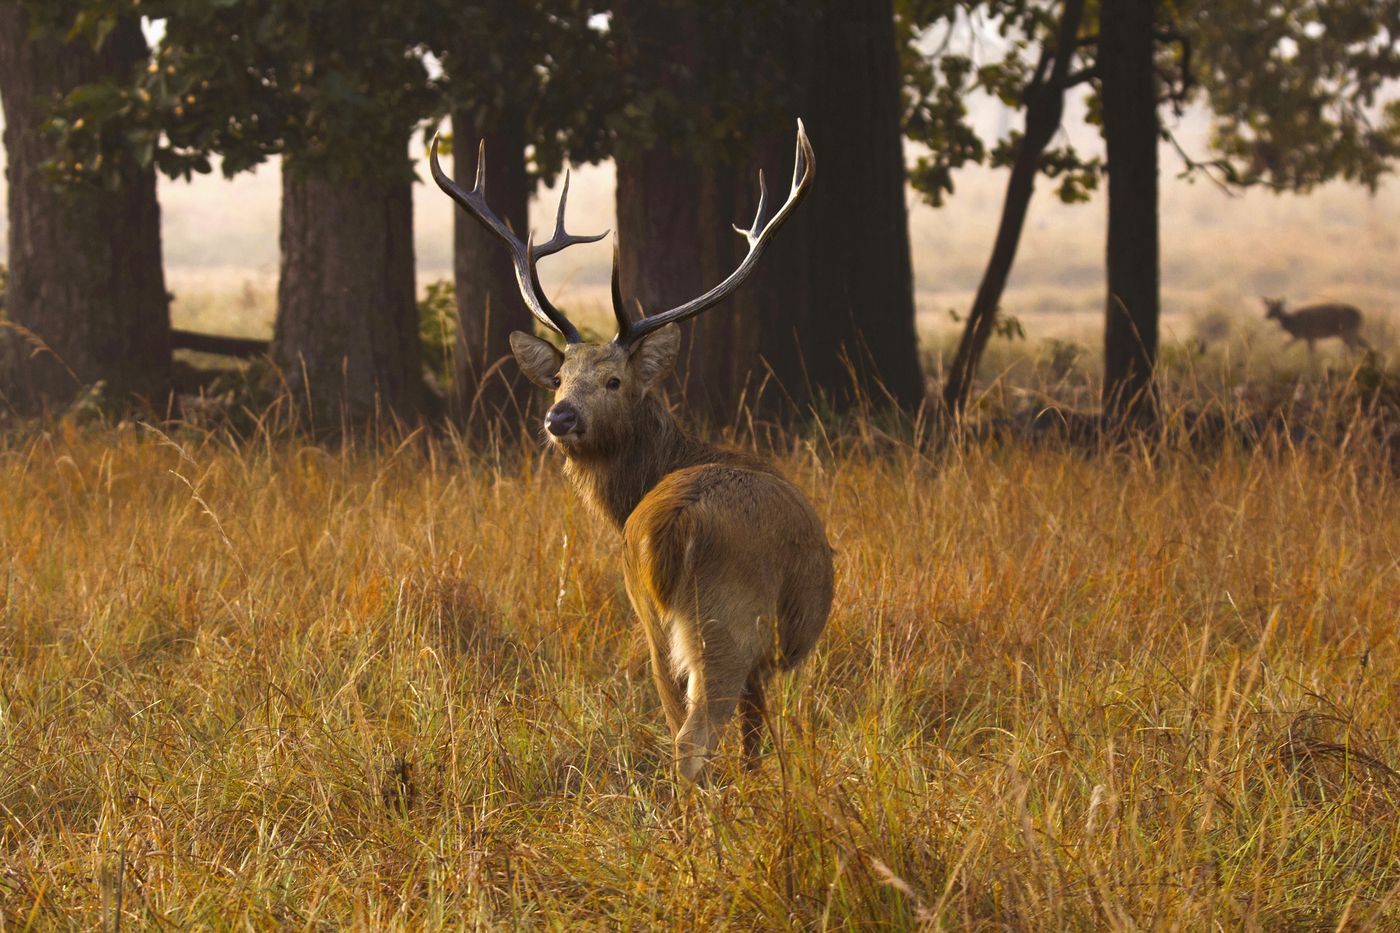 A male barasingha (swamp deer) showing off its beautiful forked horns in Kanha Reserve and National Park. In background one can see the female swamp deer as well 